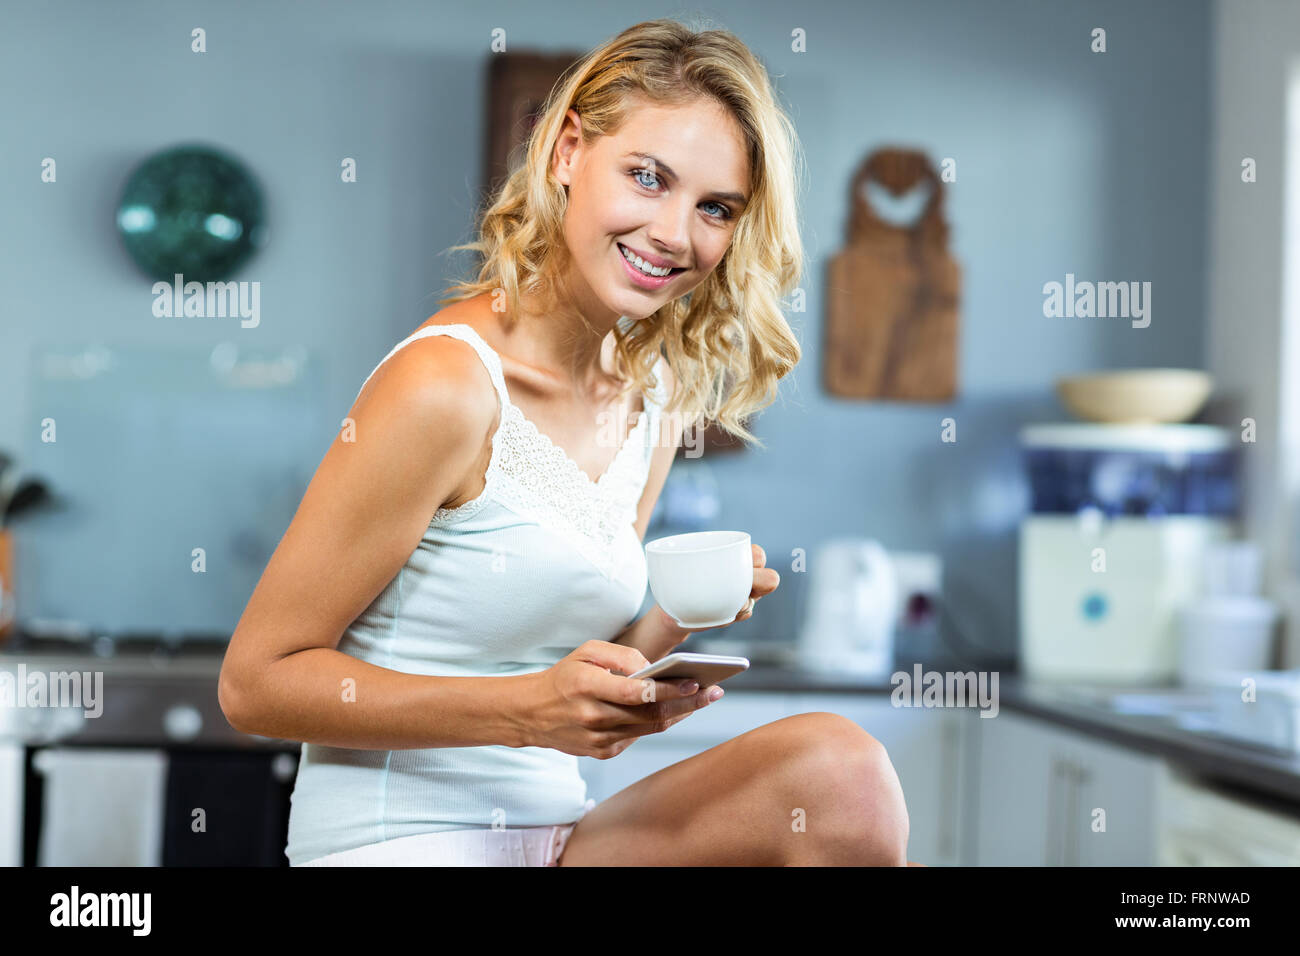 Portrait of smiling young woman at home Banque D'Images